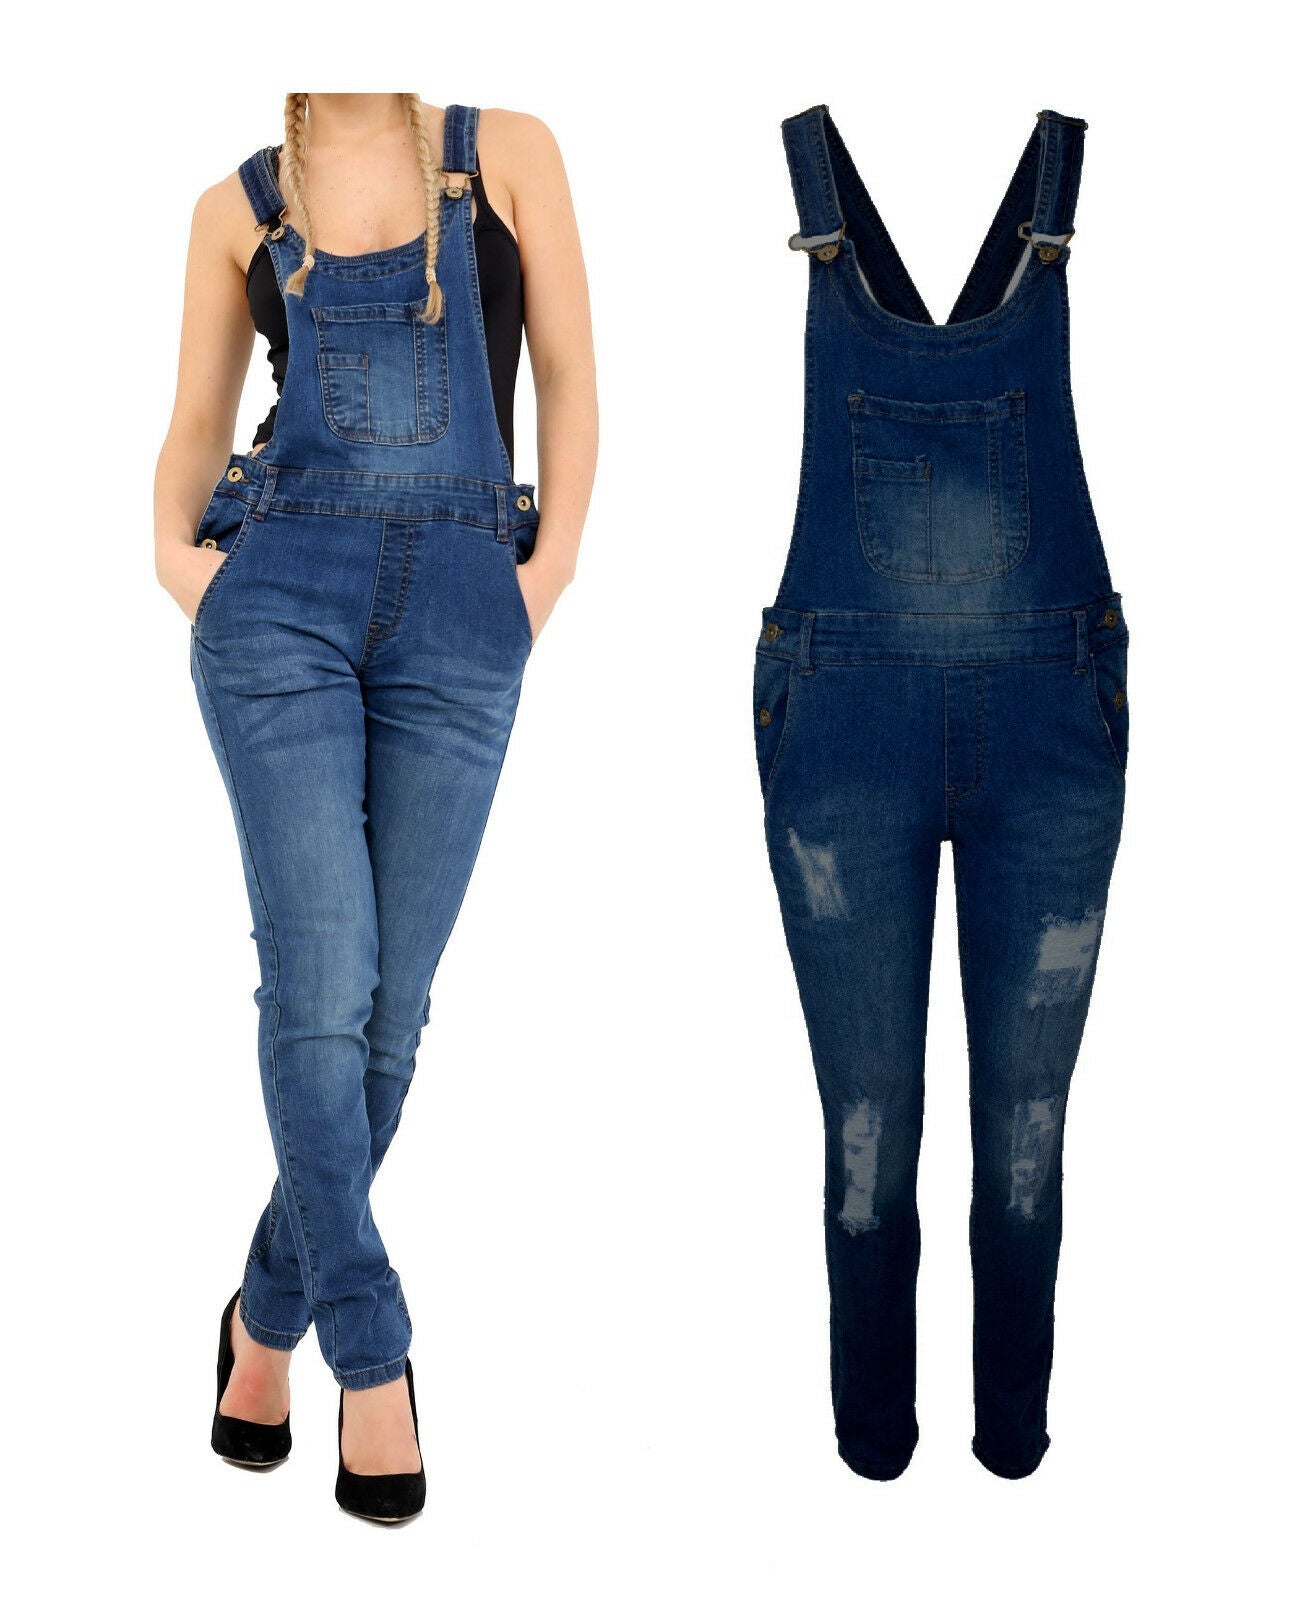 Ladies Long Length Dungaree's In Sizes 8-22. Colours Are Mid & Dark Wash Also A ripped option Is Available. They Have Pockets At The Front And Adjustable Straps. Also Have Button Details At The Sides.